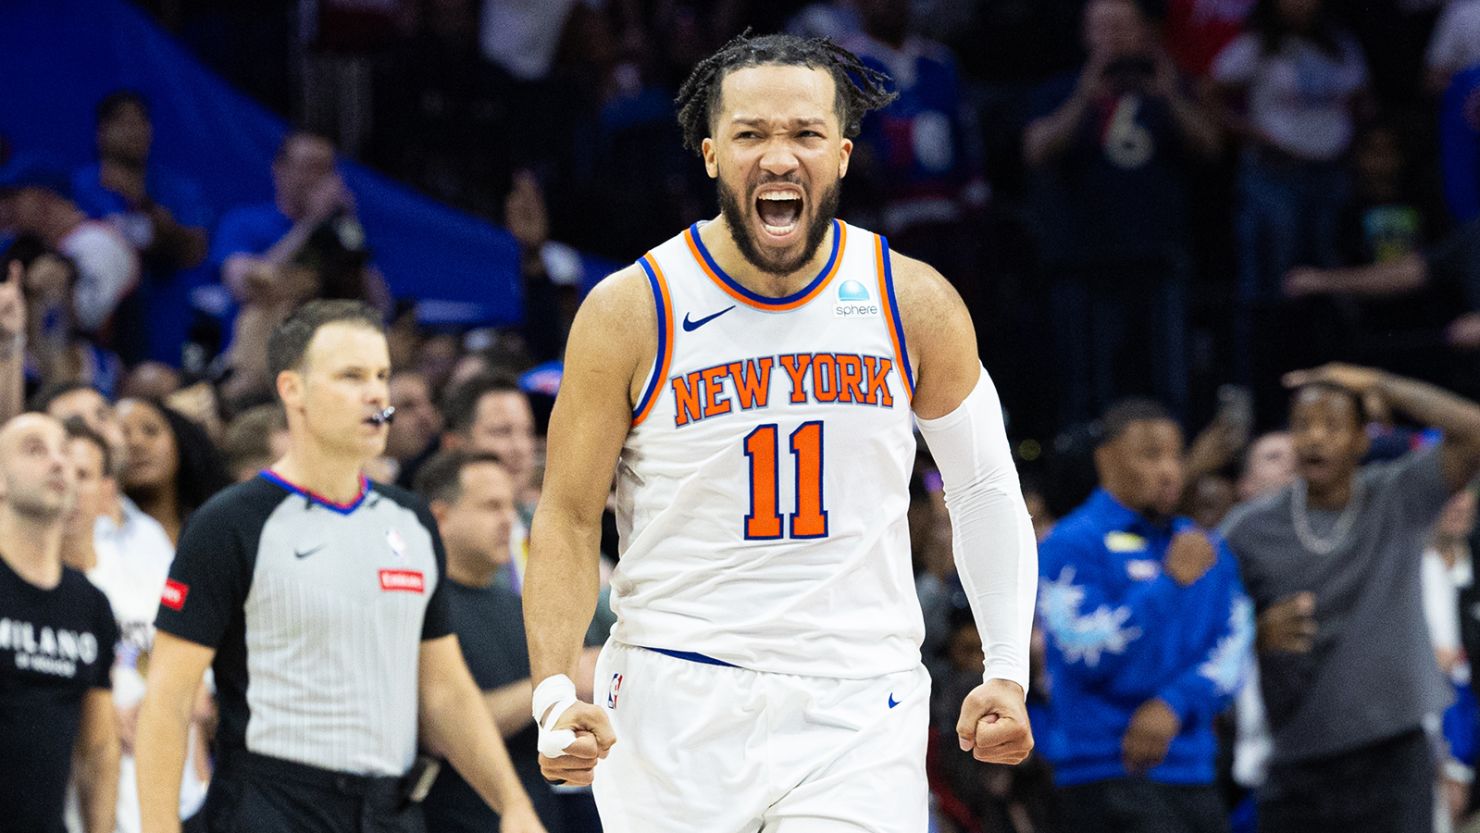 Jalen Brunson scored 41 points as the Knicks beat the 76ers to advance to the Eastern Conference semifinals.